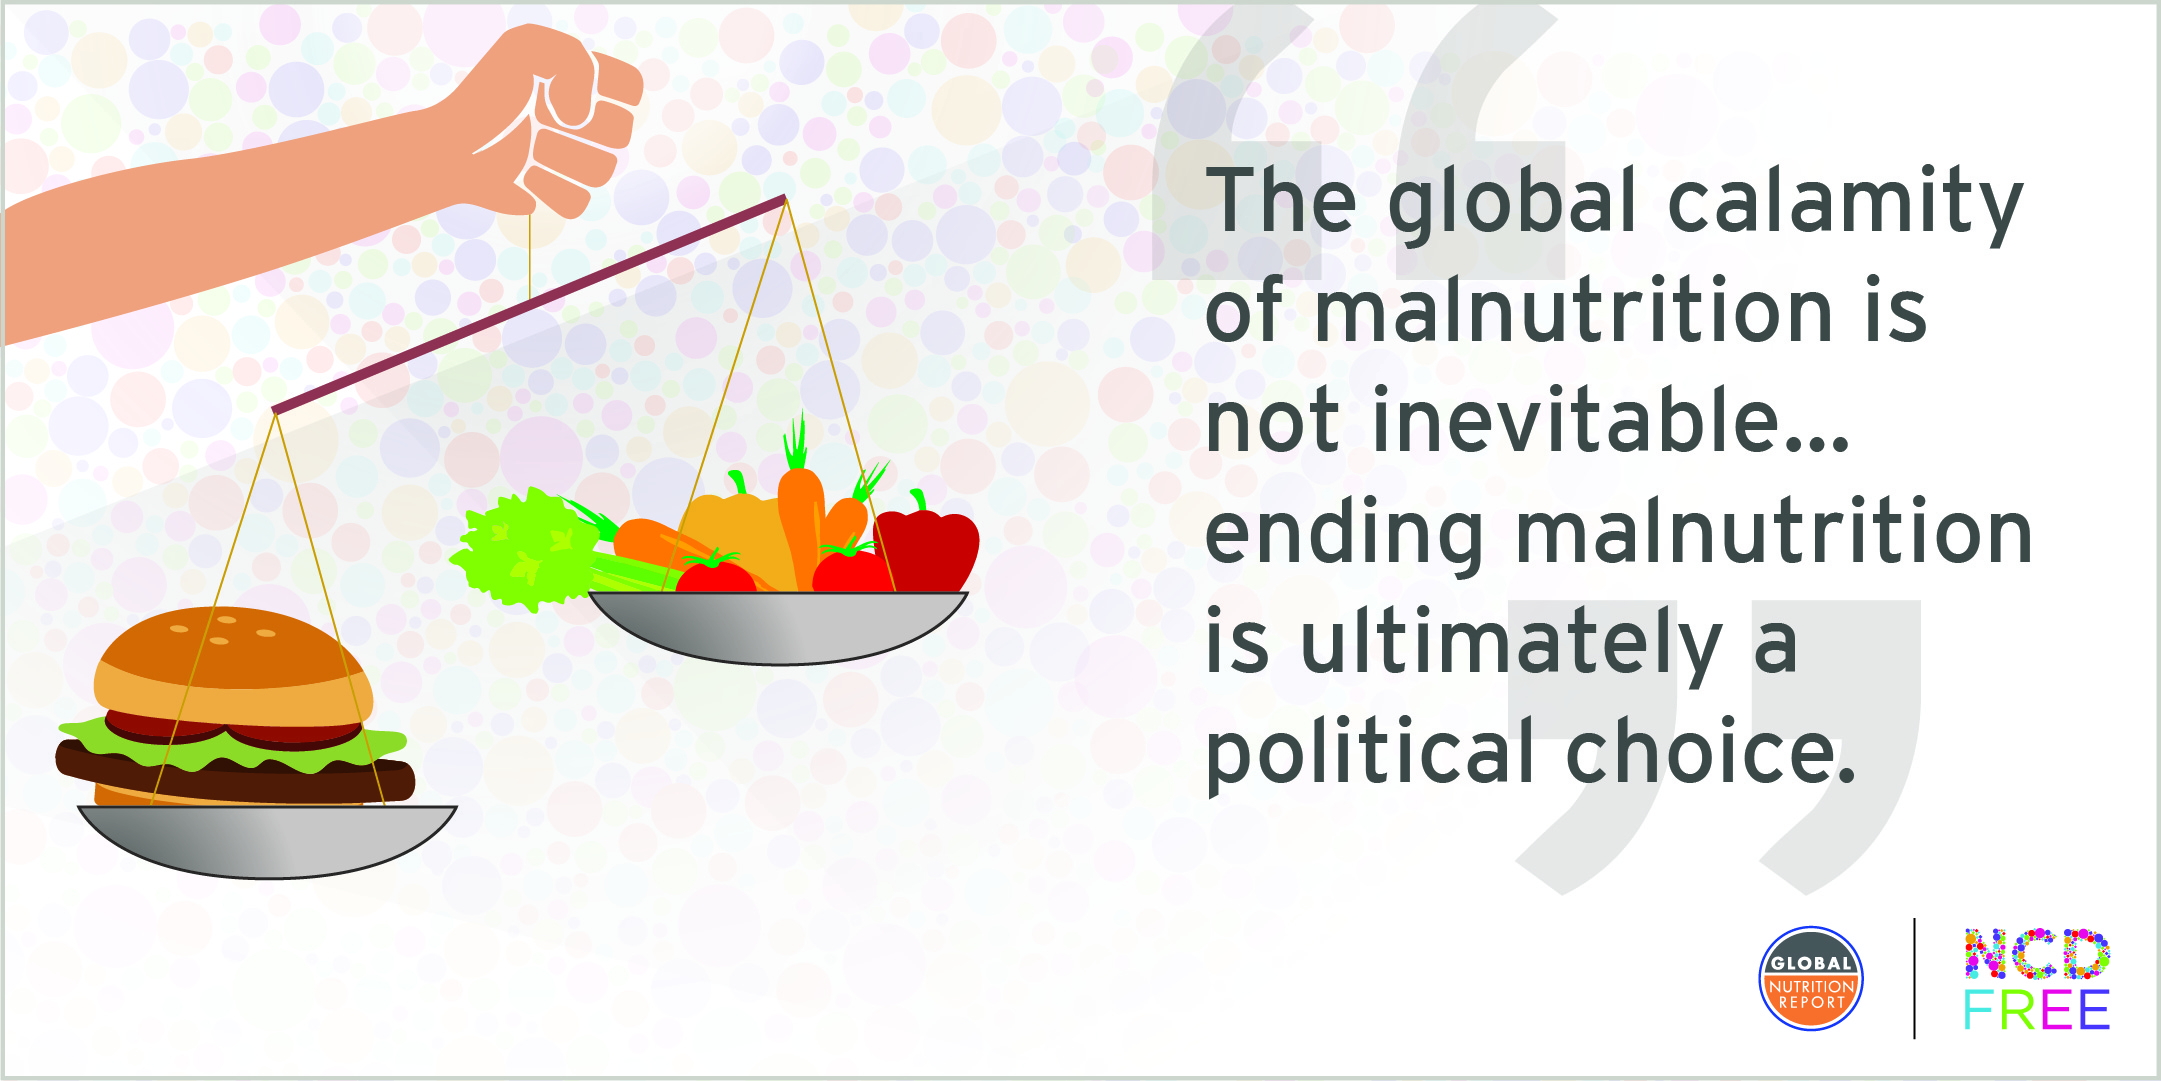 NOW AVAILABLE: The 2016 Global Nutrition Report